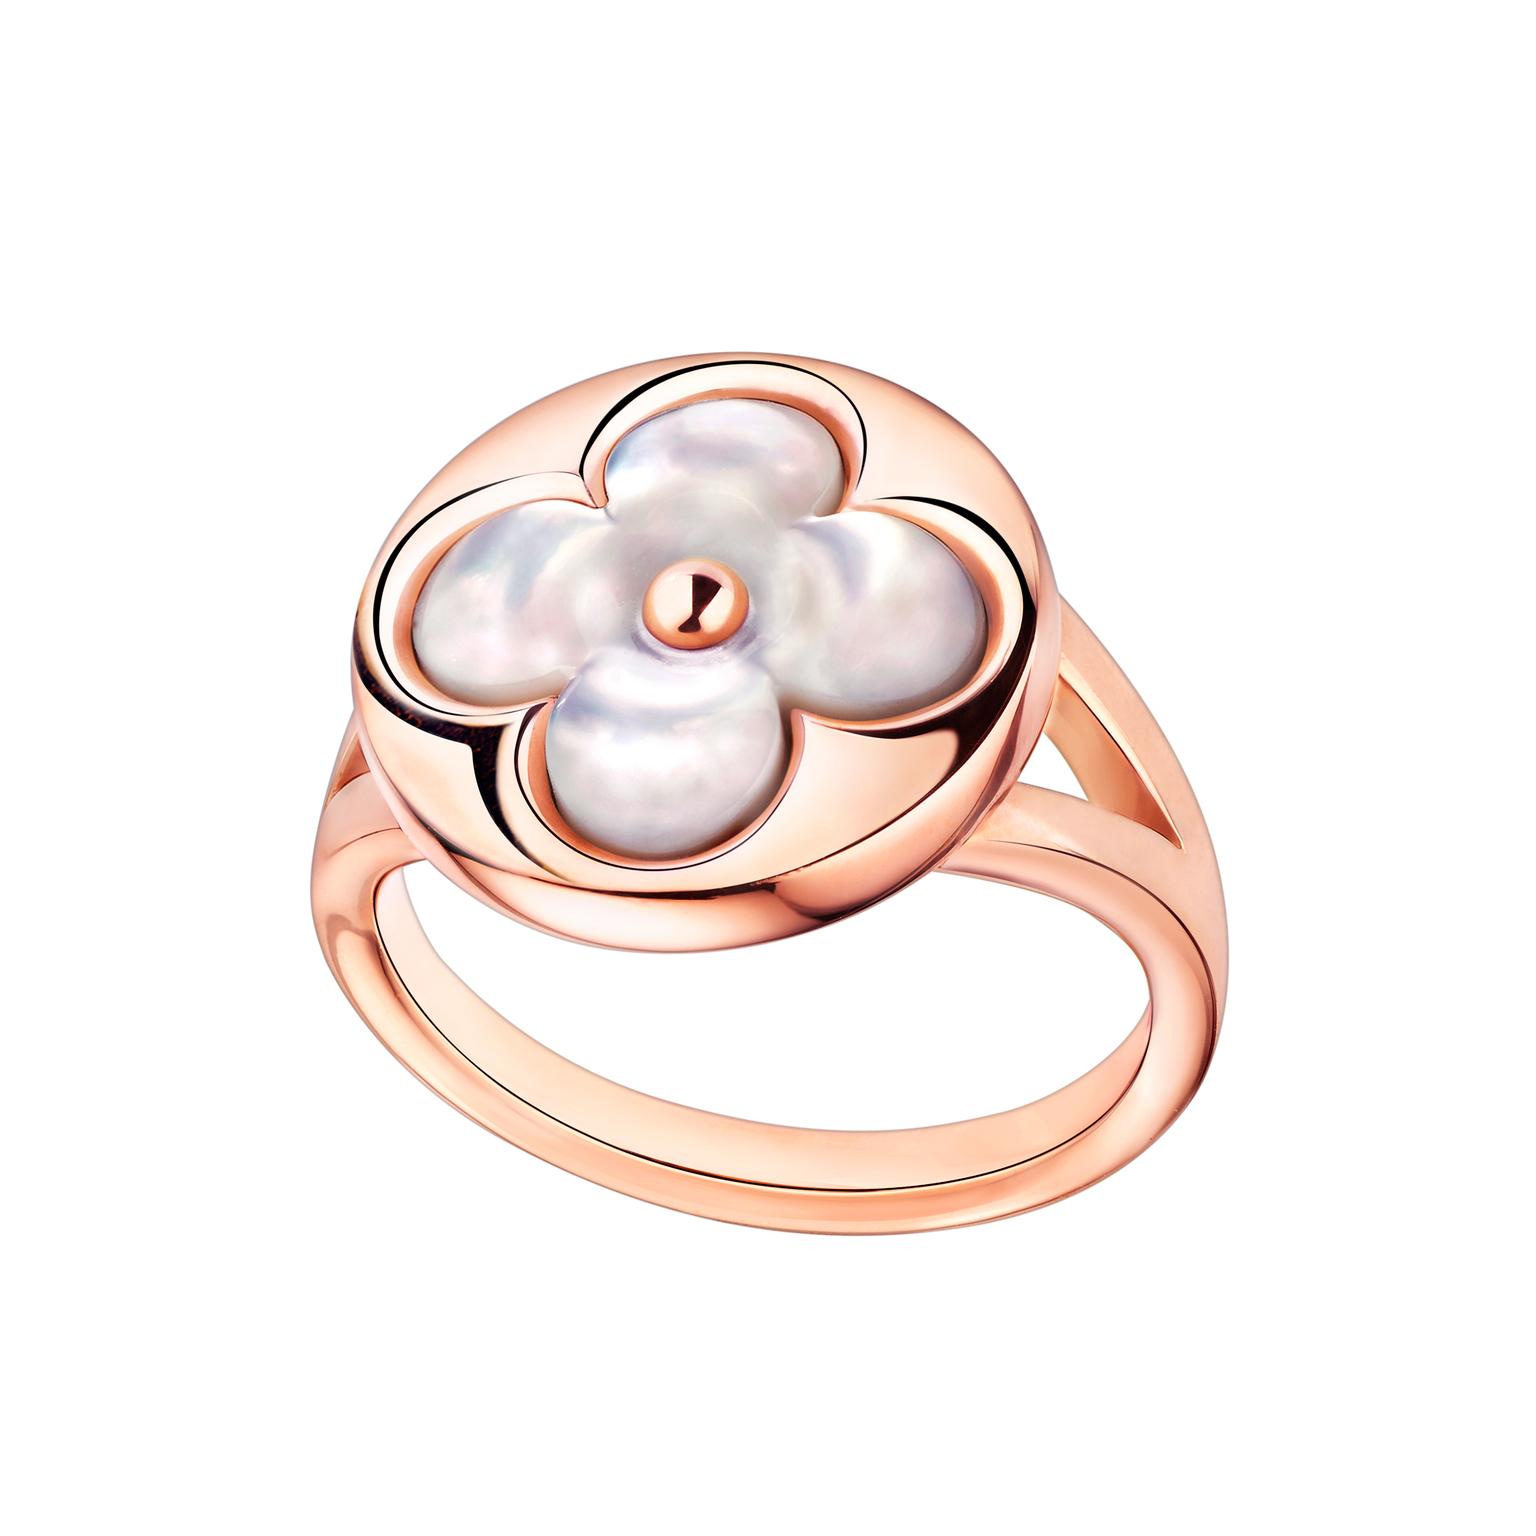 Louis Vuitton Blossom Open Ring, Pink Gold and Diamonds. Size 47